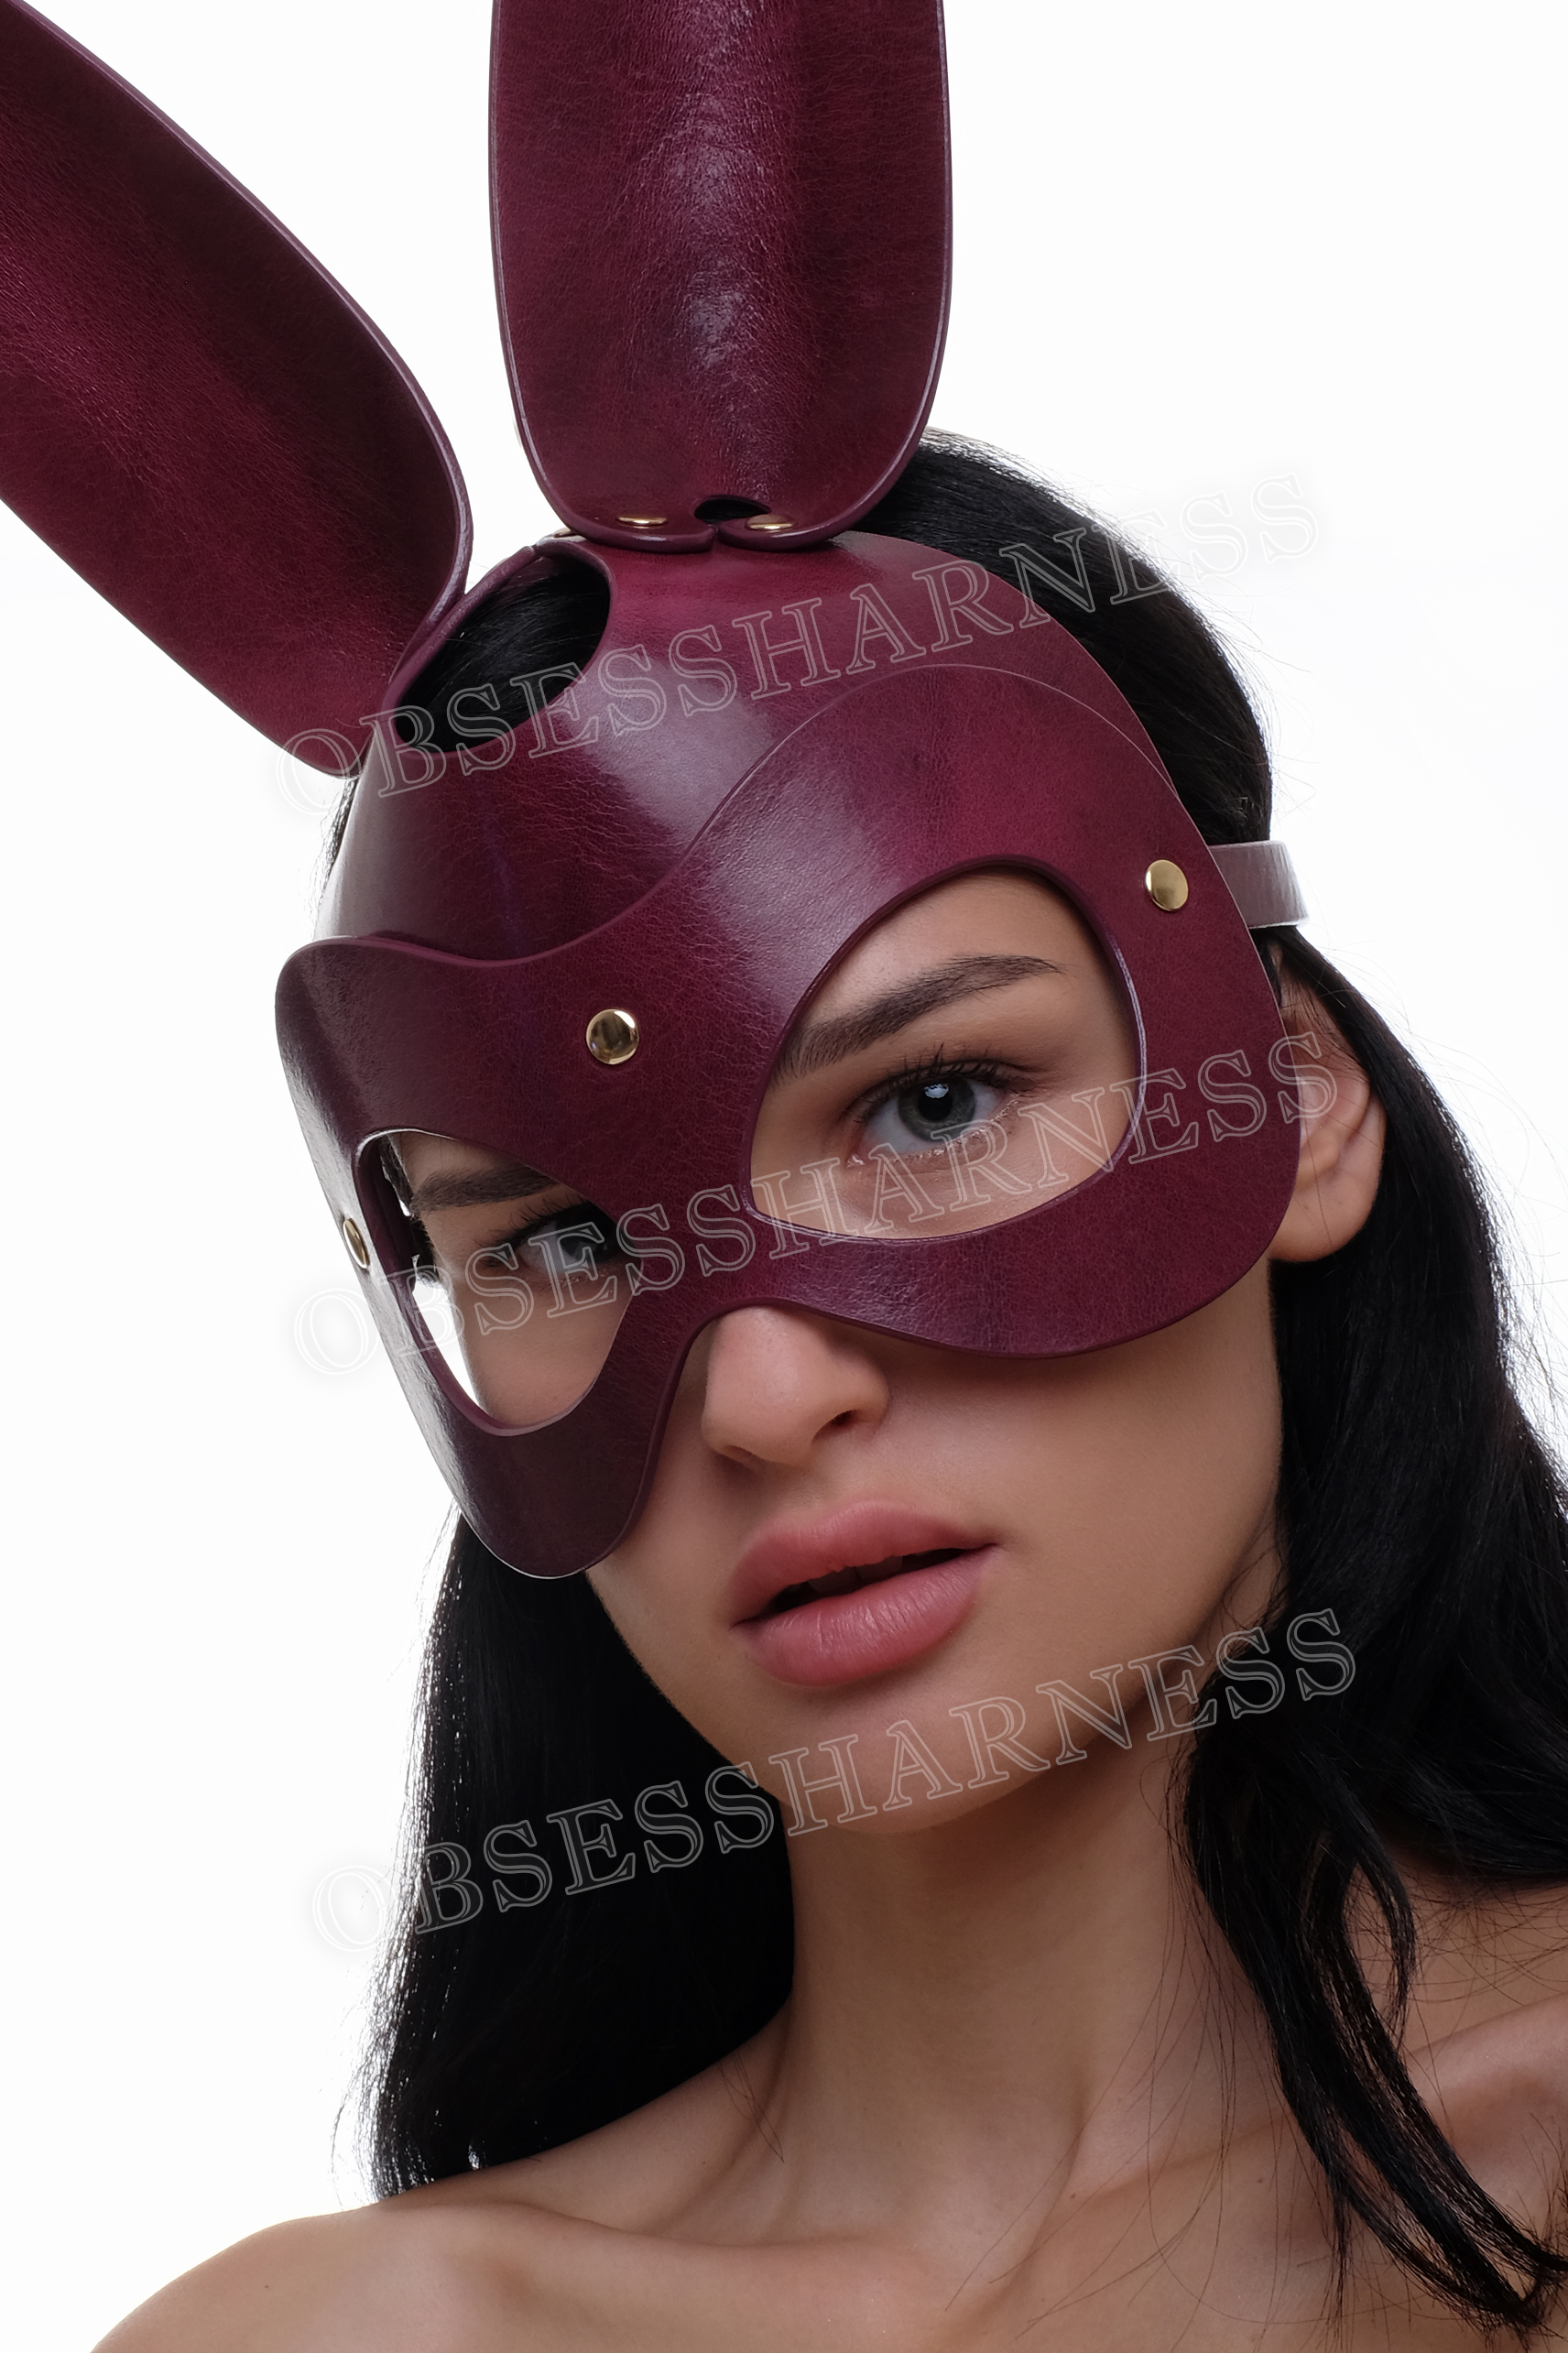 Rabbit mask leather kink with slits for the eyes and adjustment at the back for pet games and BDSM